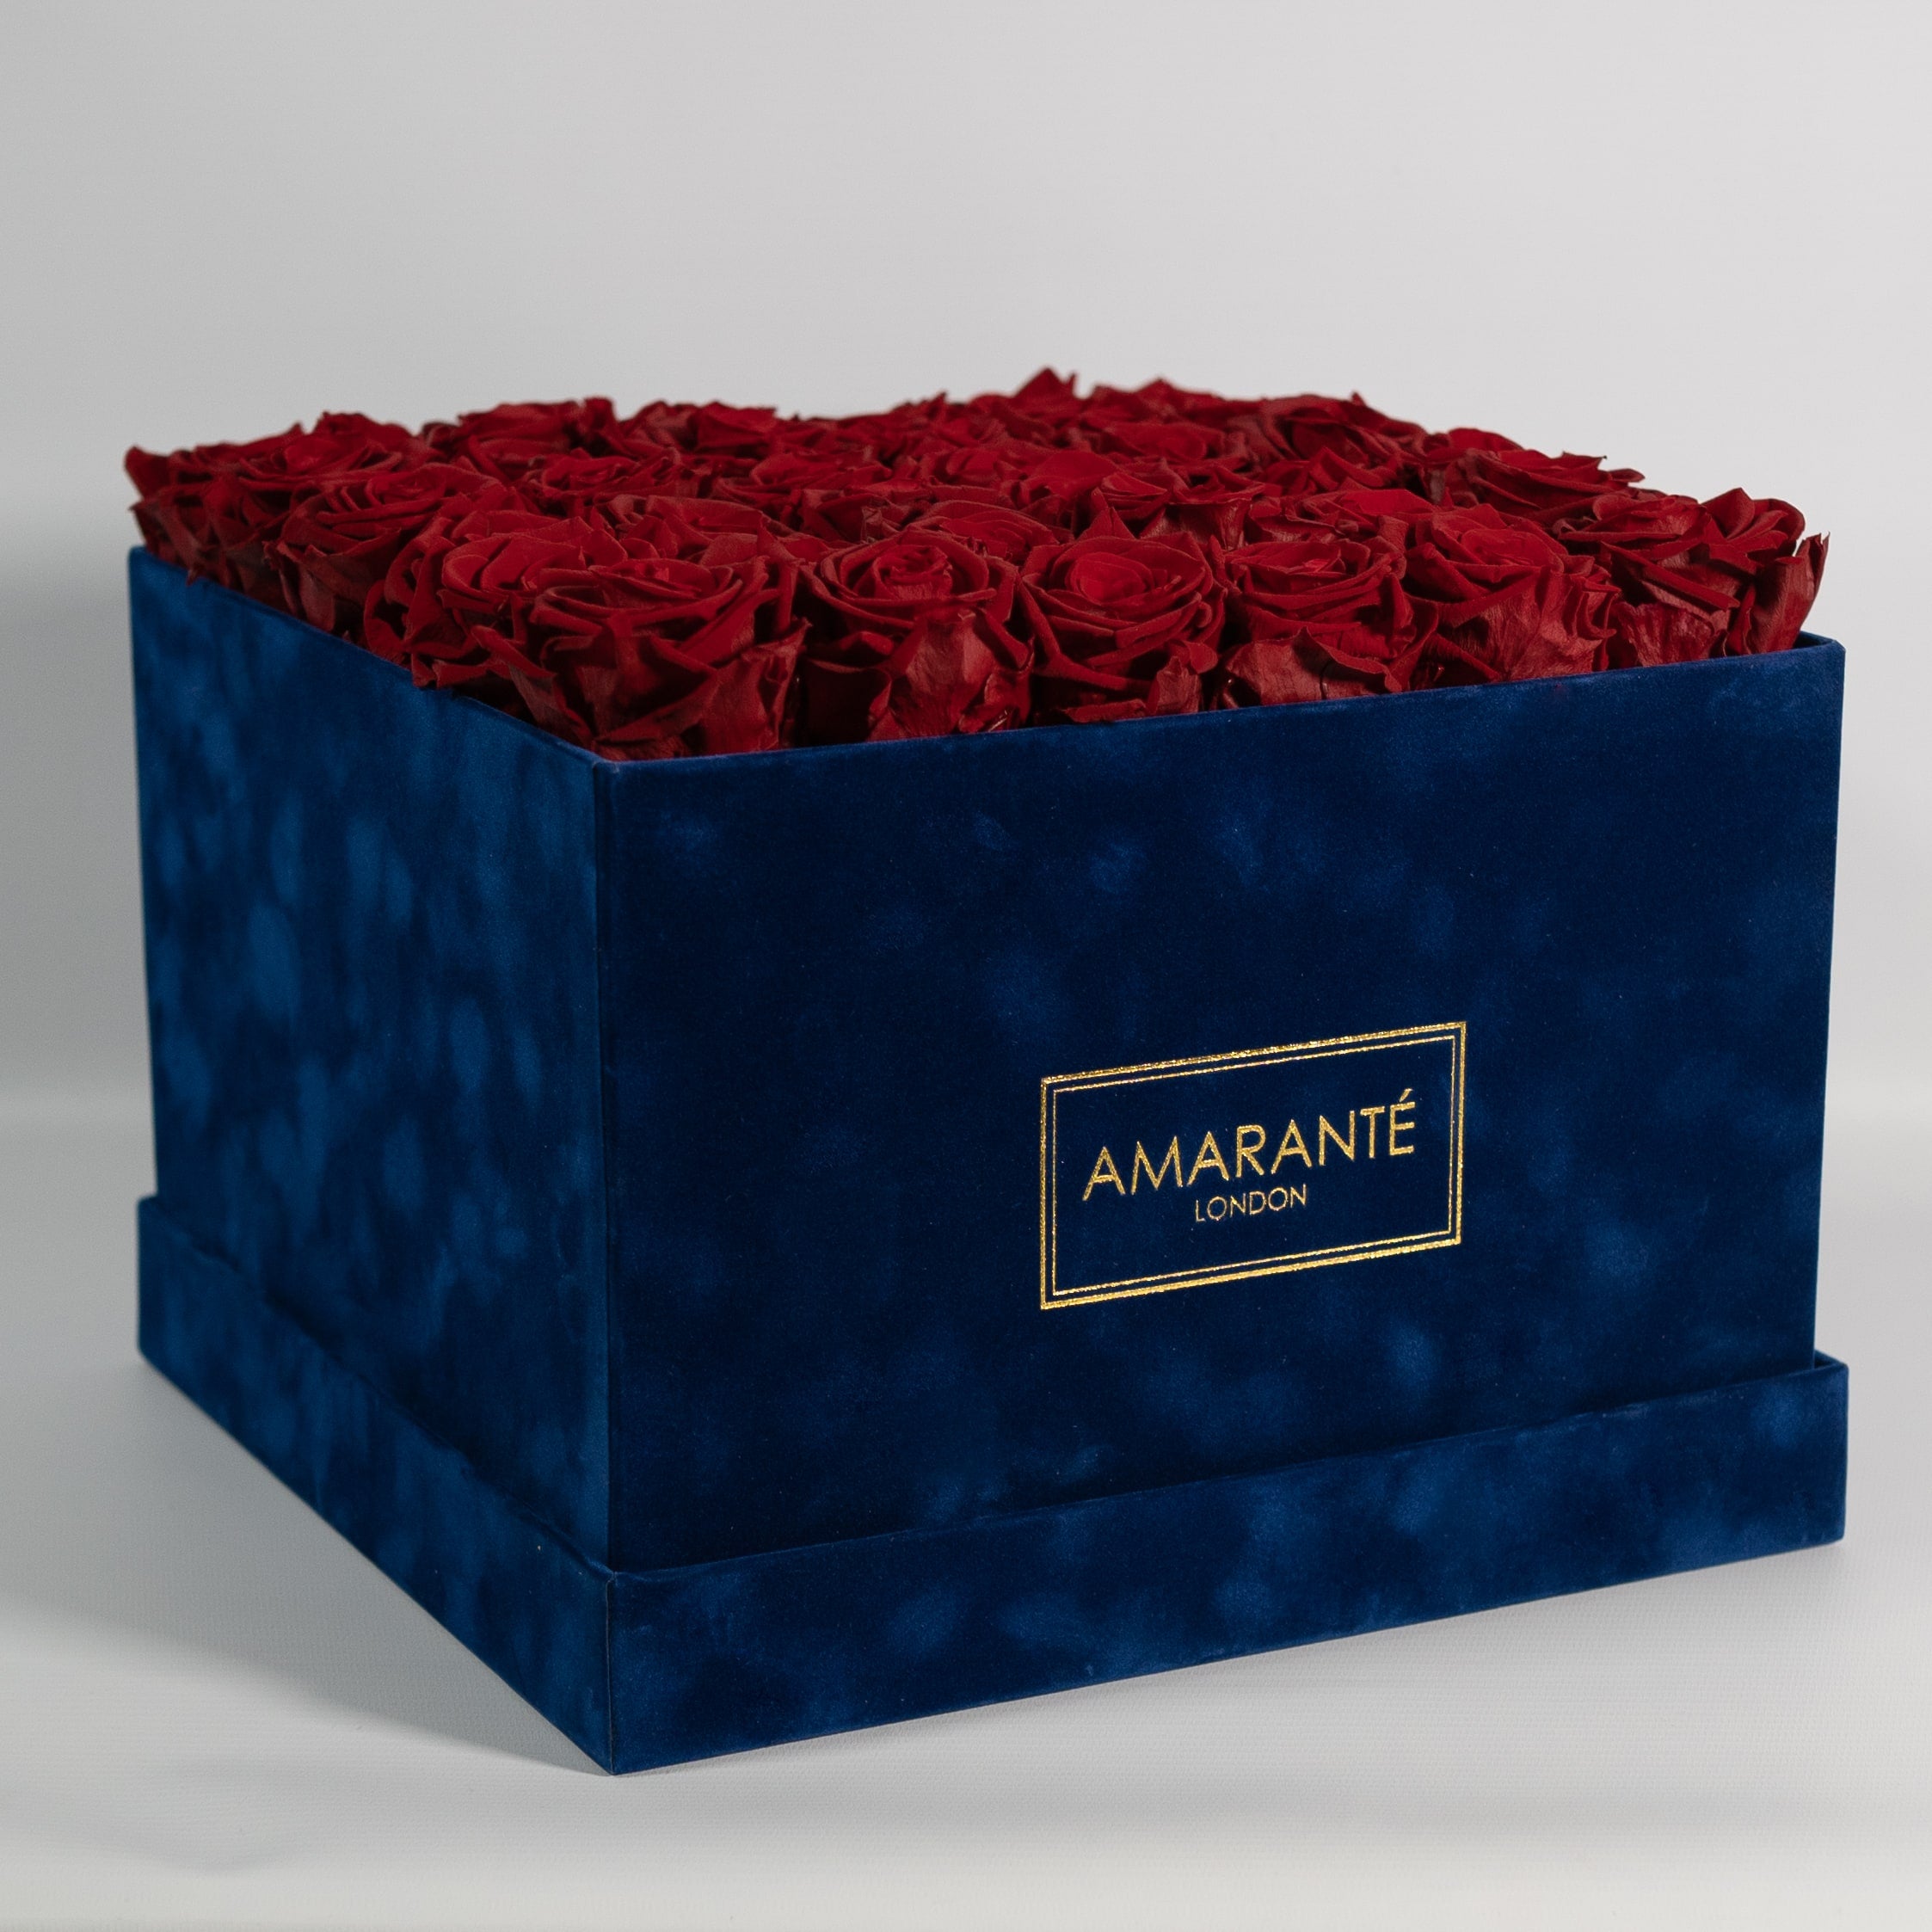 Dapper dark red Roses shown in a divine luxurious blue box, ideal for expressing love, romance, and courage. 